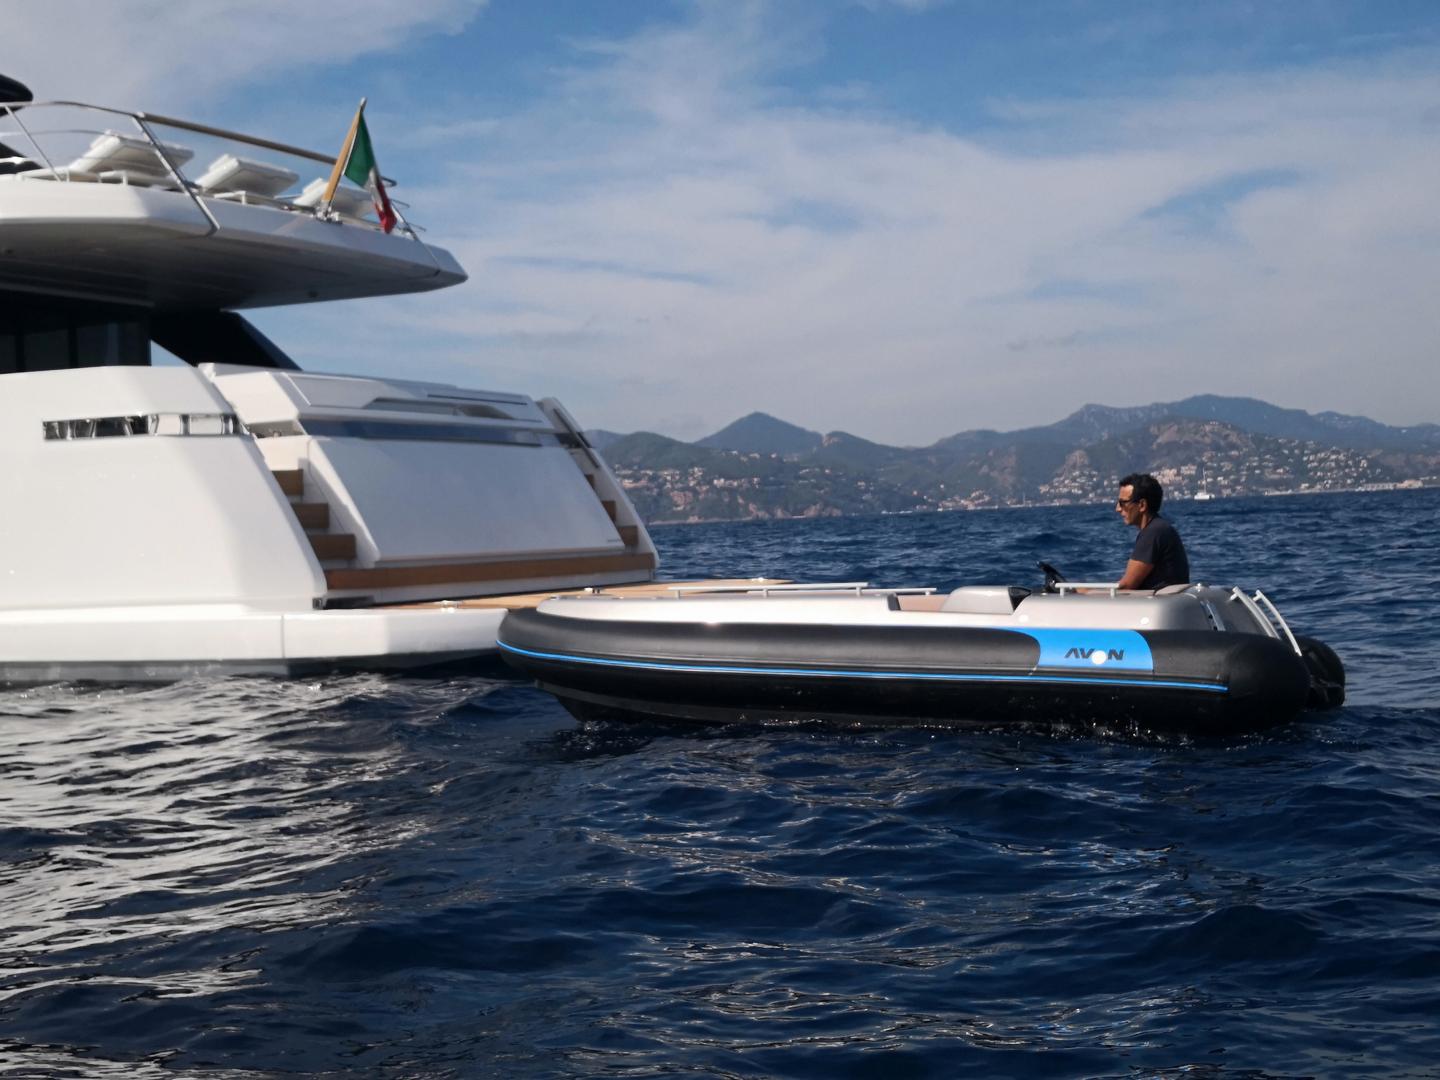 Avon (Z Nautic Group) & Torqeedo launch the eJET 450, a 100% electric tender